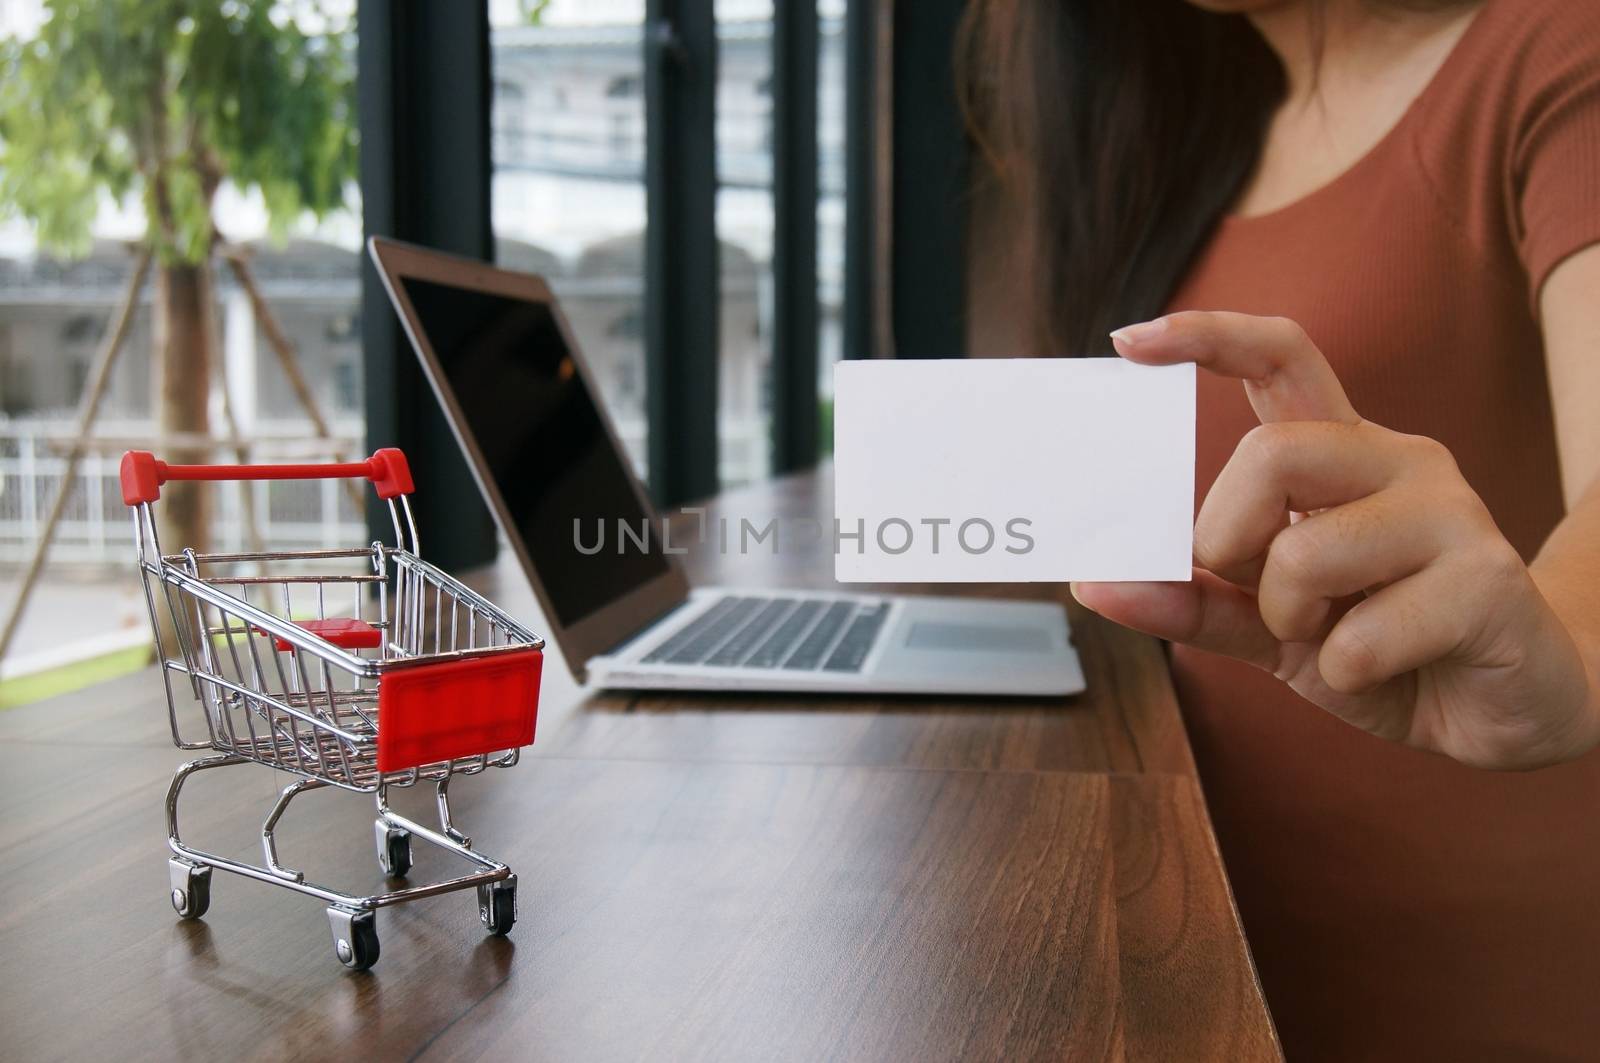 Small shopping cart with Laptop and business card copy space screen for shopping online concept